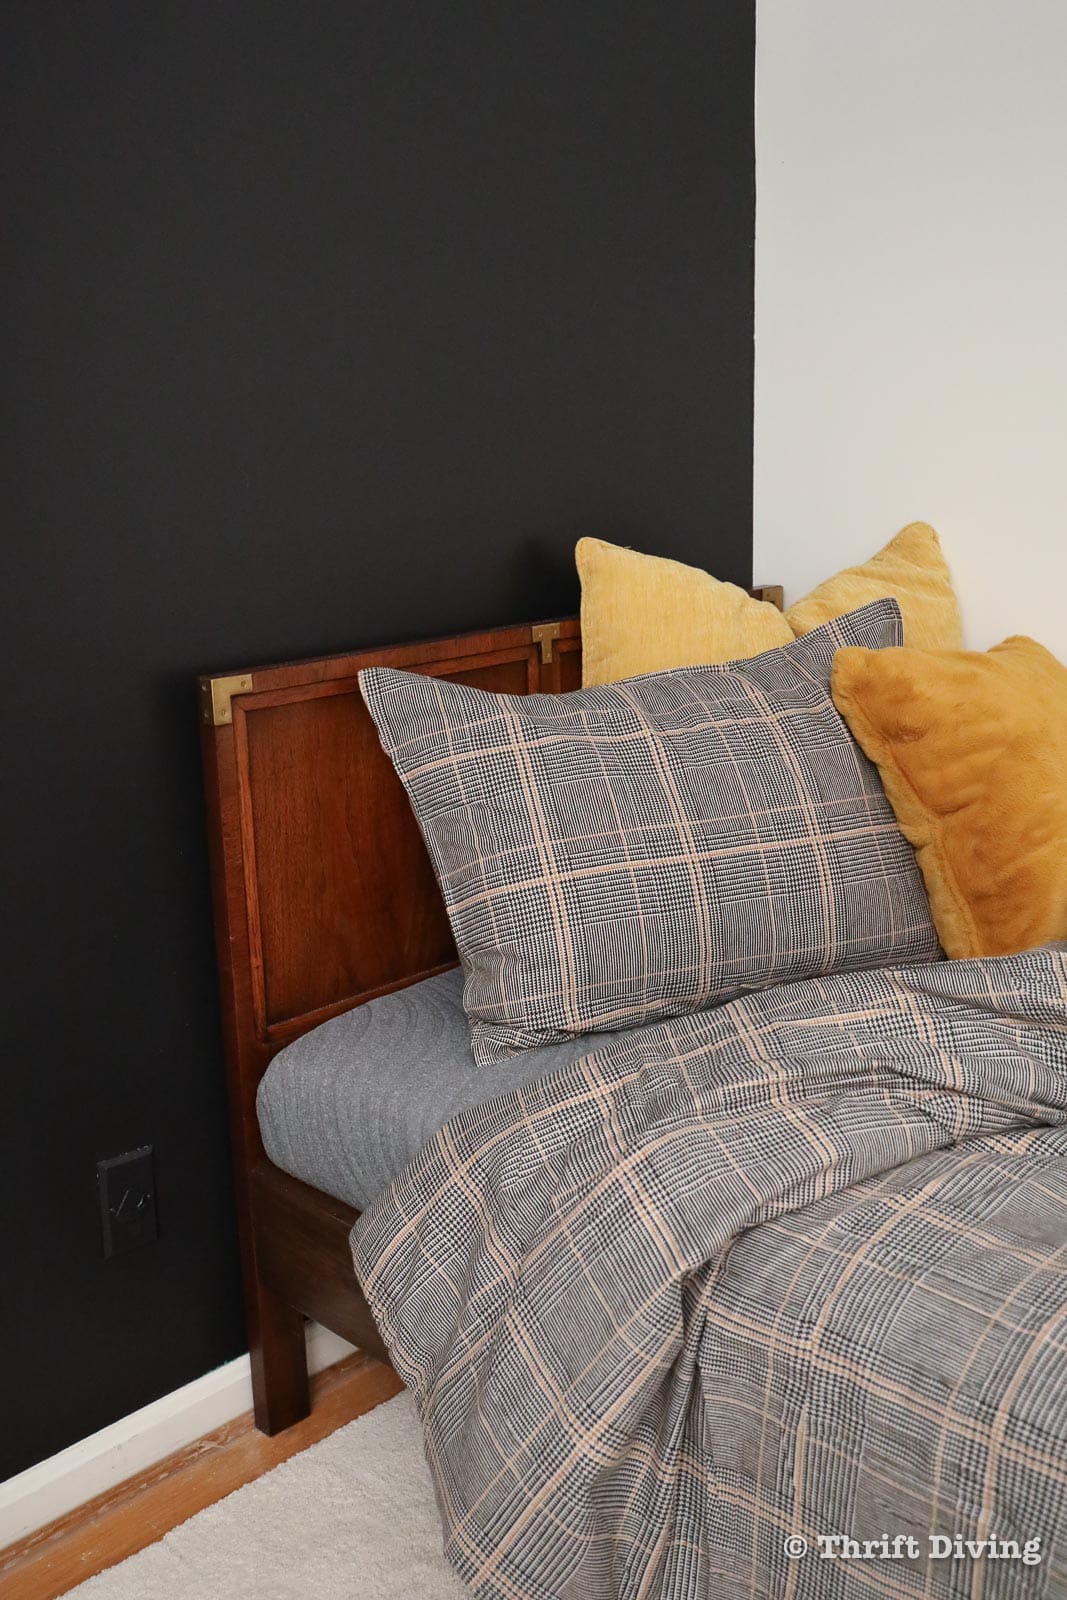 10 Lessons You MUST Learn Before Your Next Room Makeover - Boys bedroom with masculine bedding, black accent wall, gold accents. - Thrift Diving